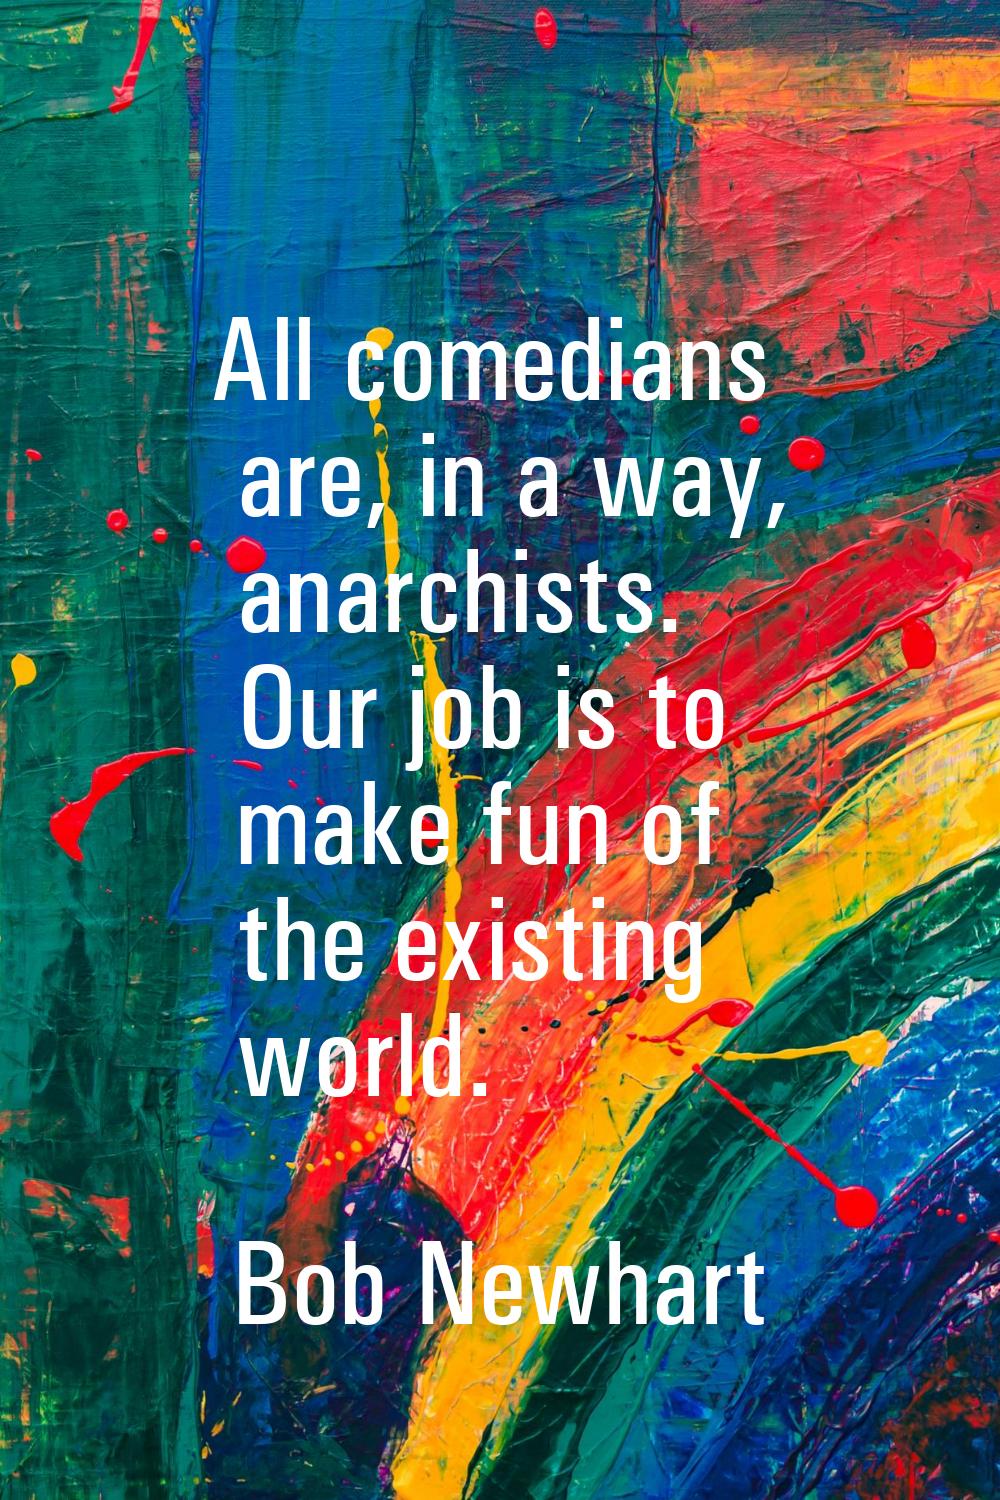 All comedians are, in a way, anarchists. Our job is to make fun of the existing world.